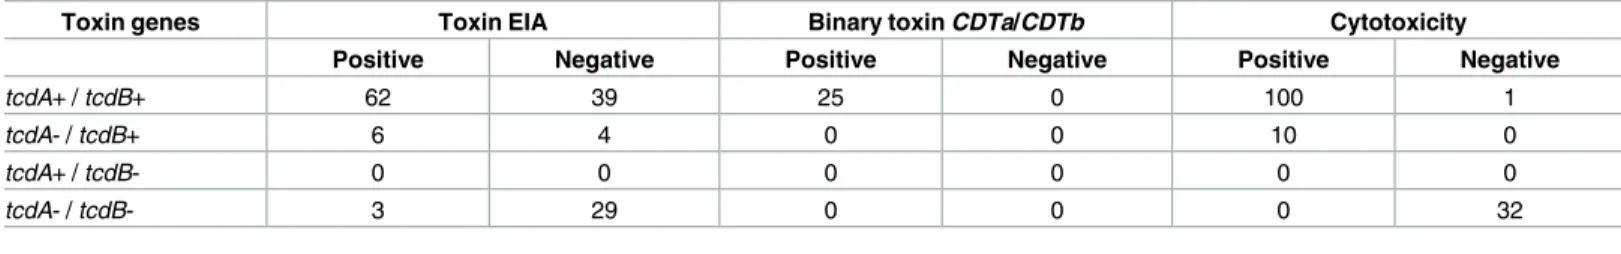 Table 5. Distribution of toxin genes profiles, toxin EIA and cytotoxicity in culture of C